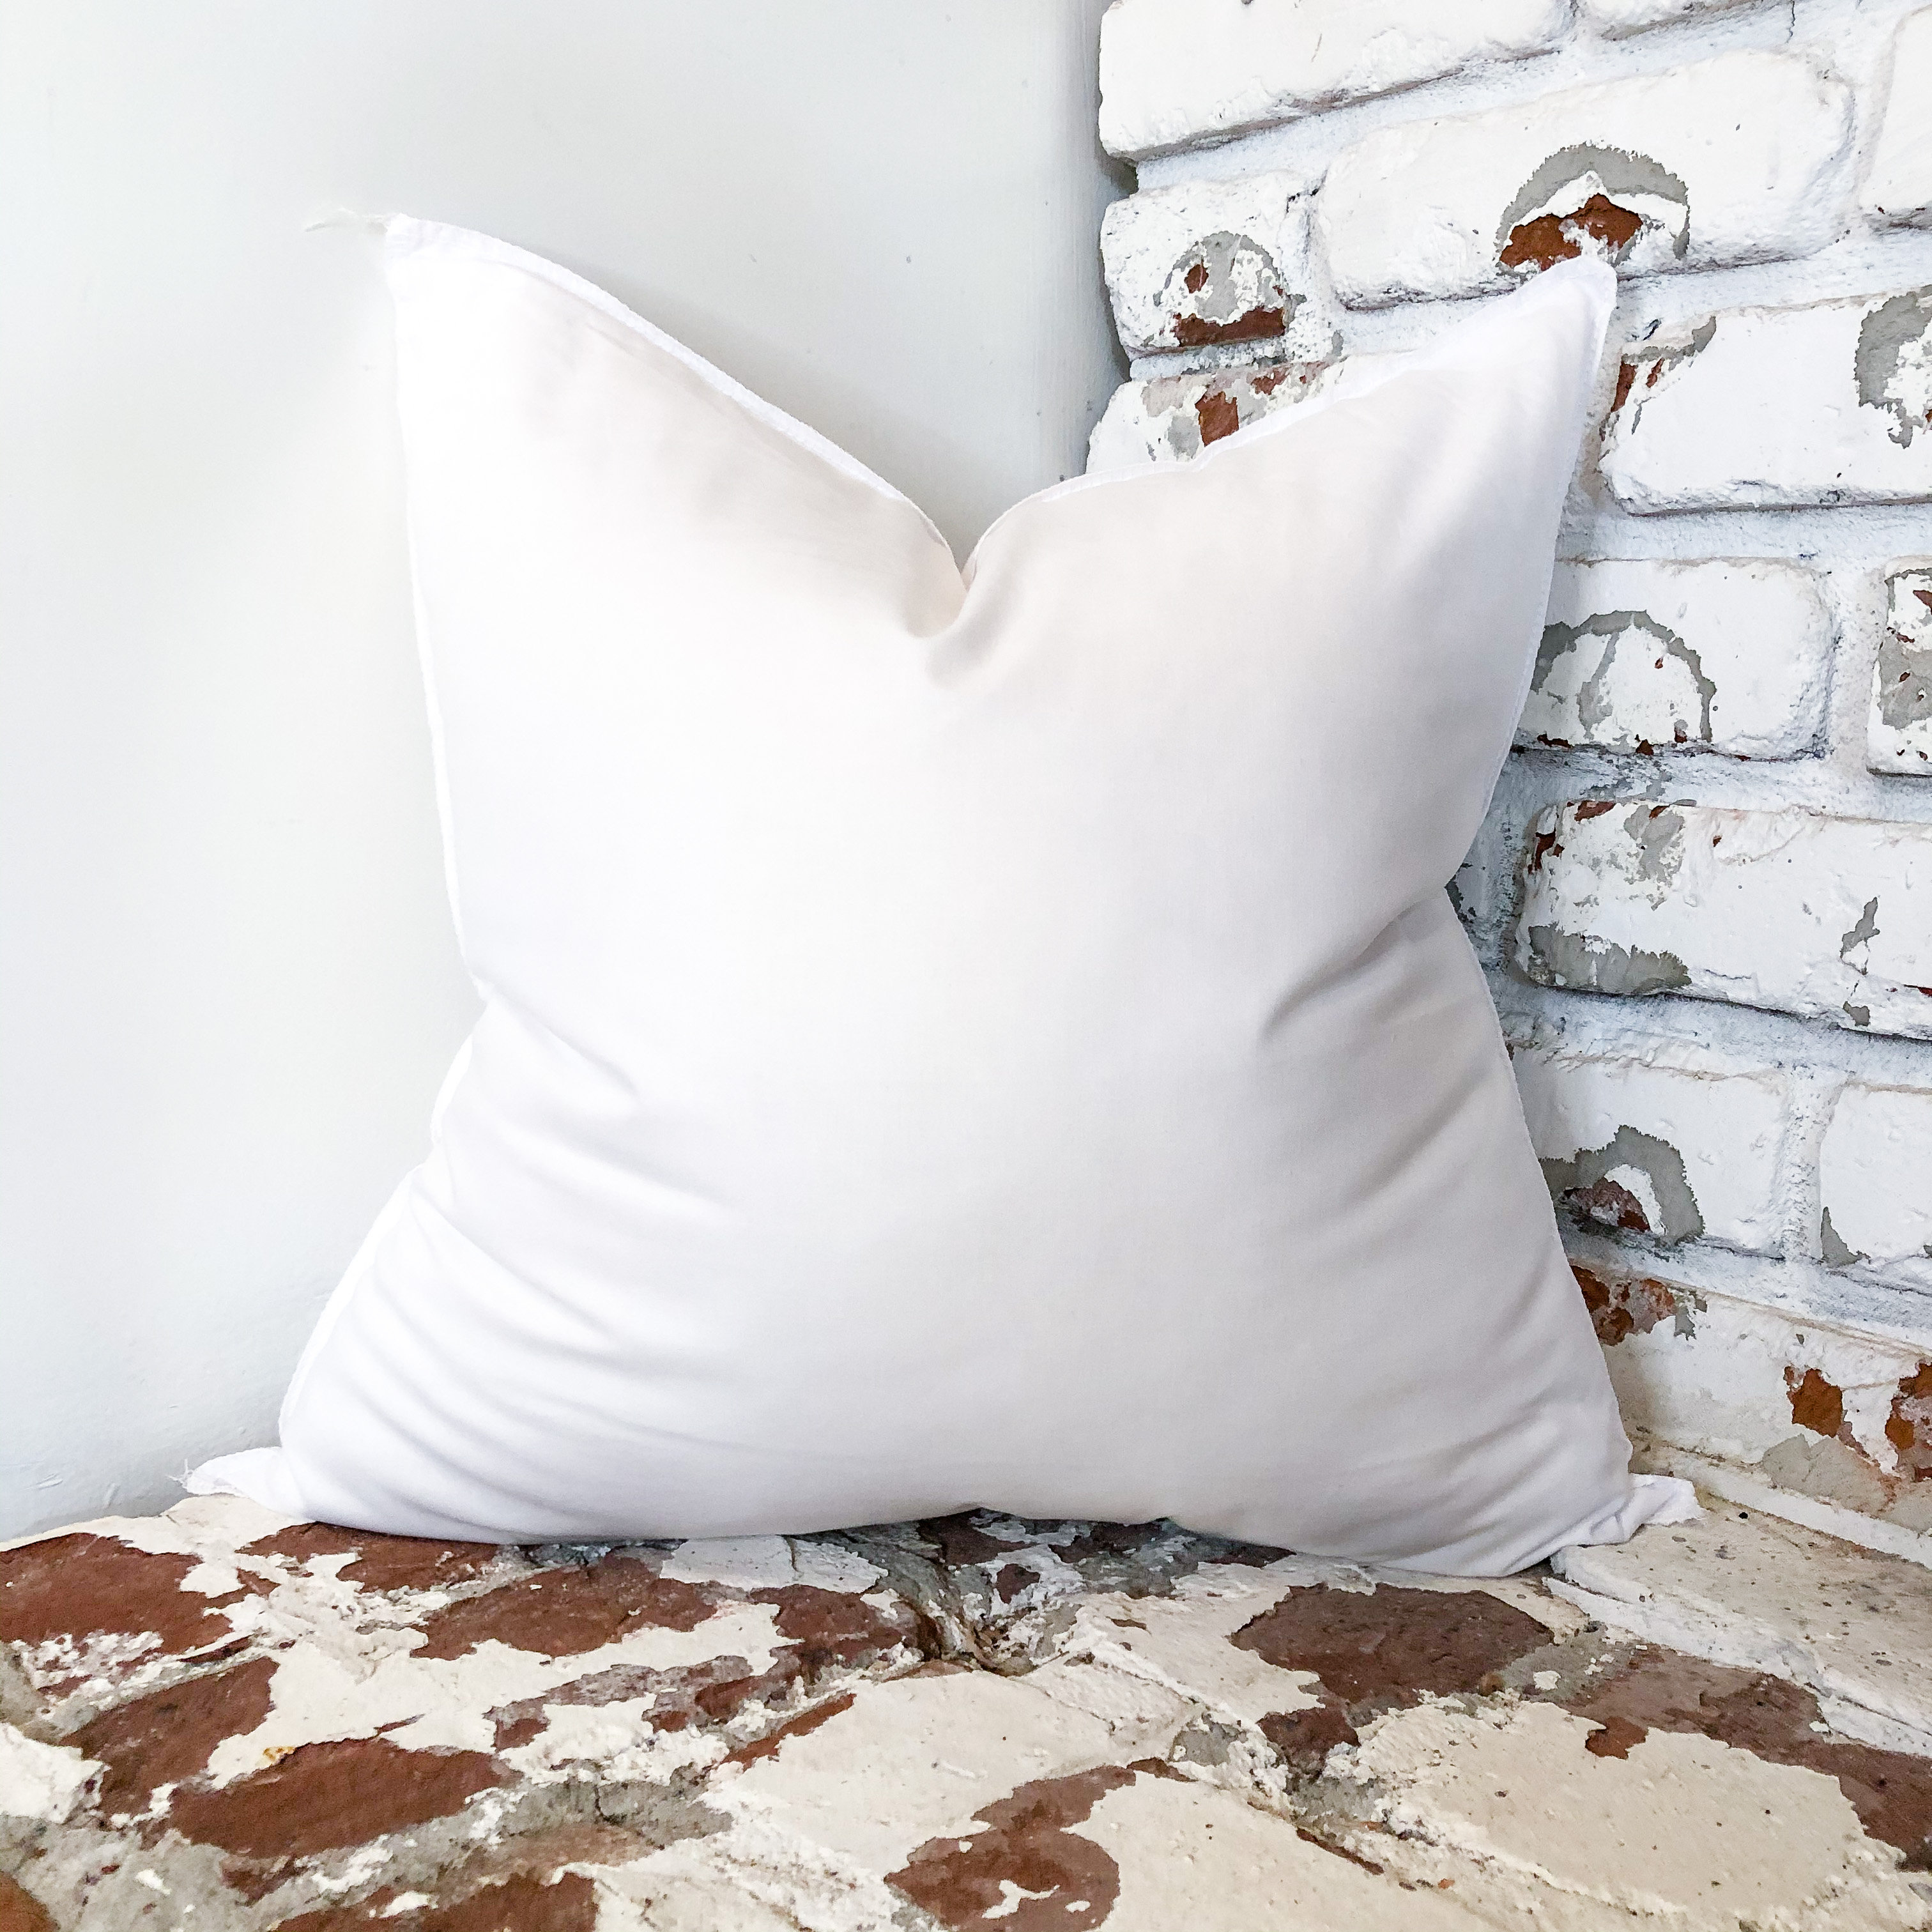 Faux Down Pillow Inserts  Fluffy throw pillows, Pillows, Throw pillow  inserts